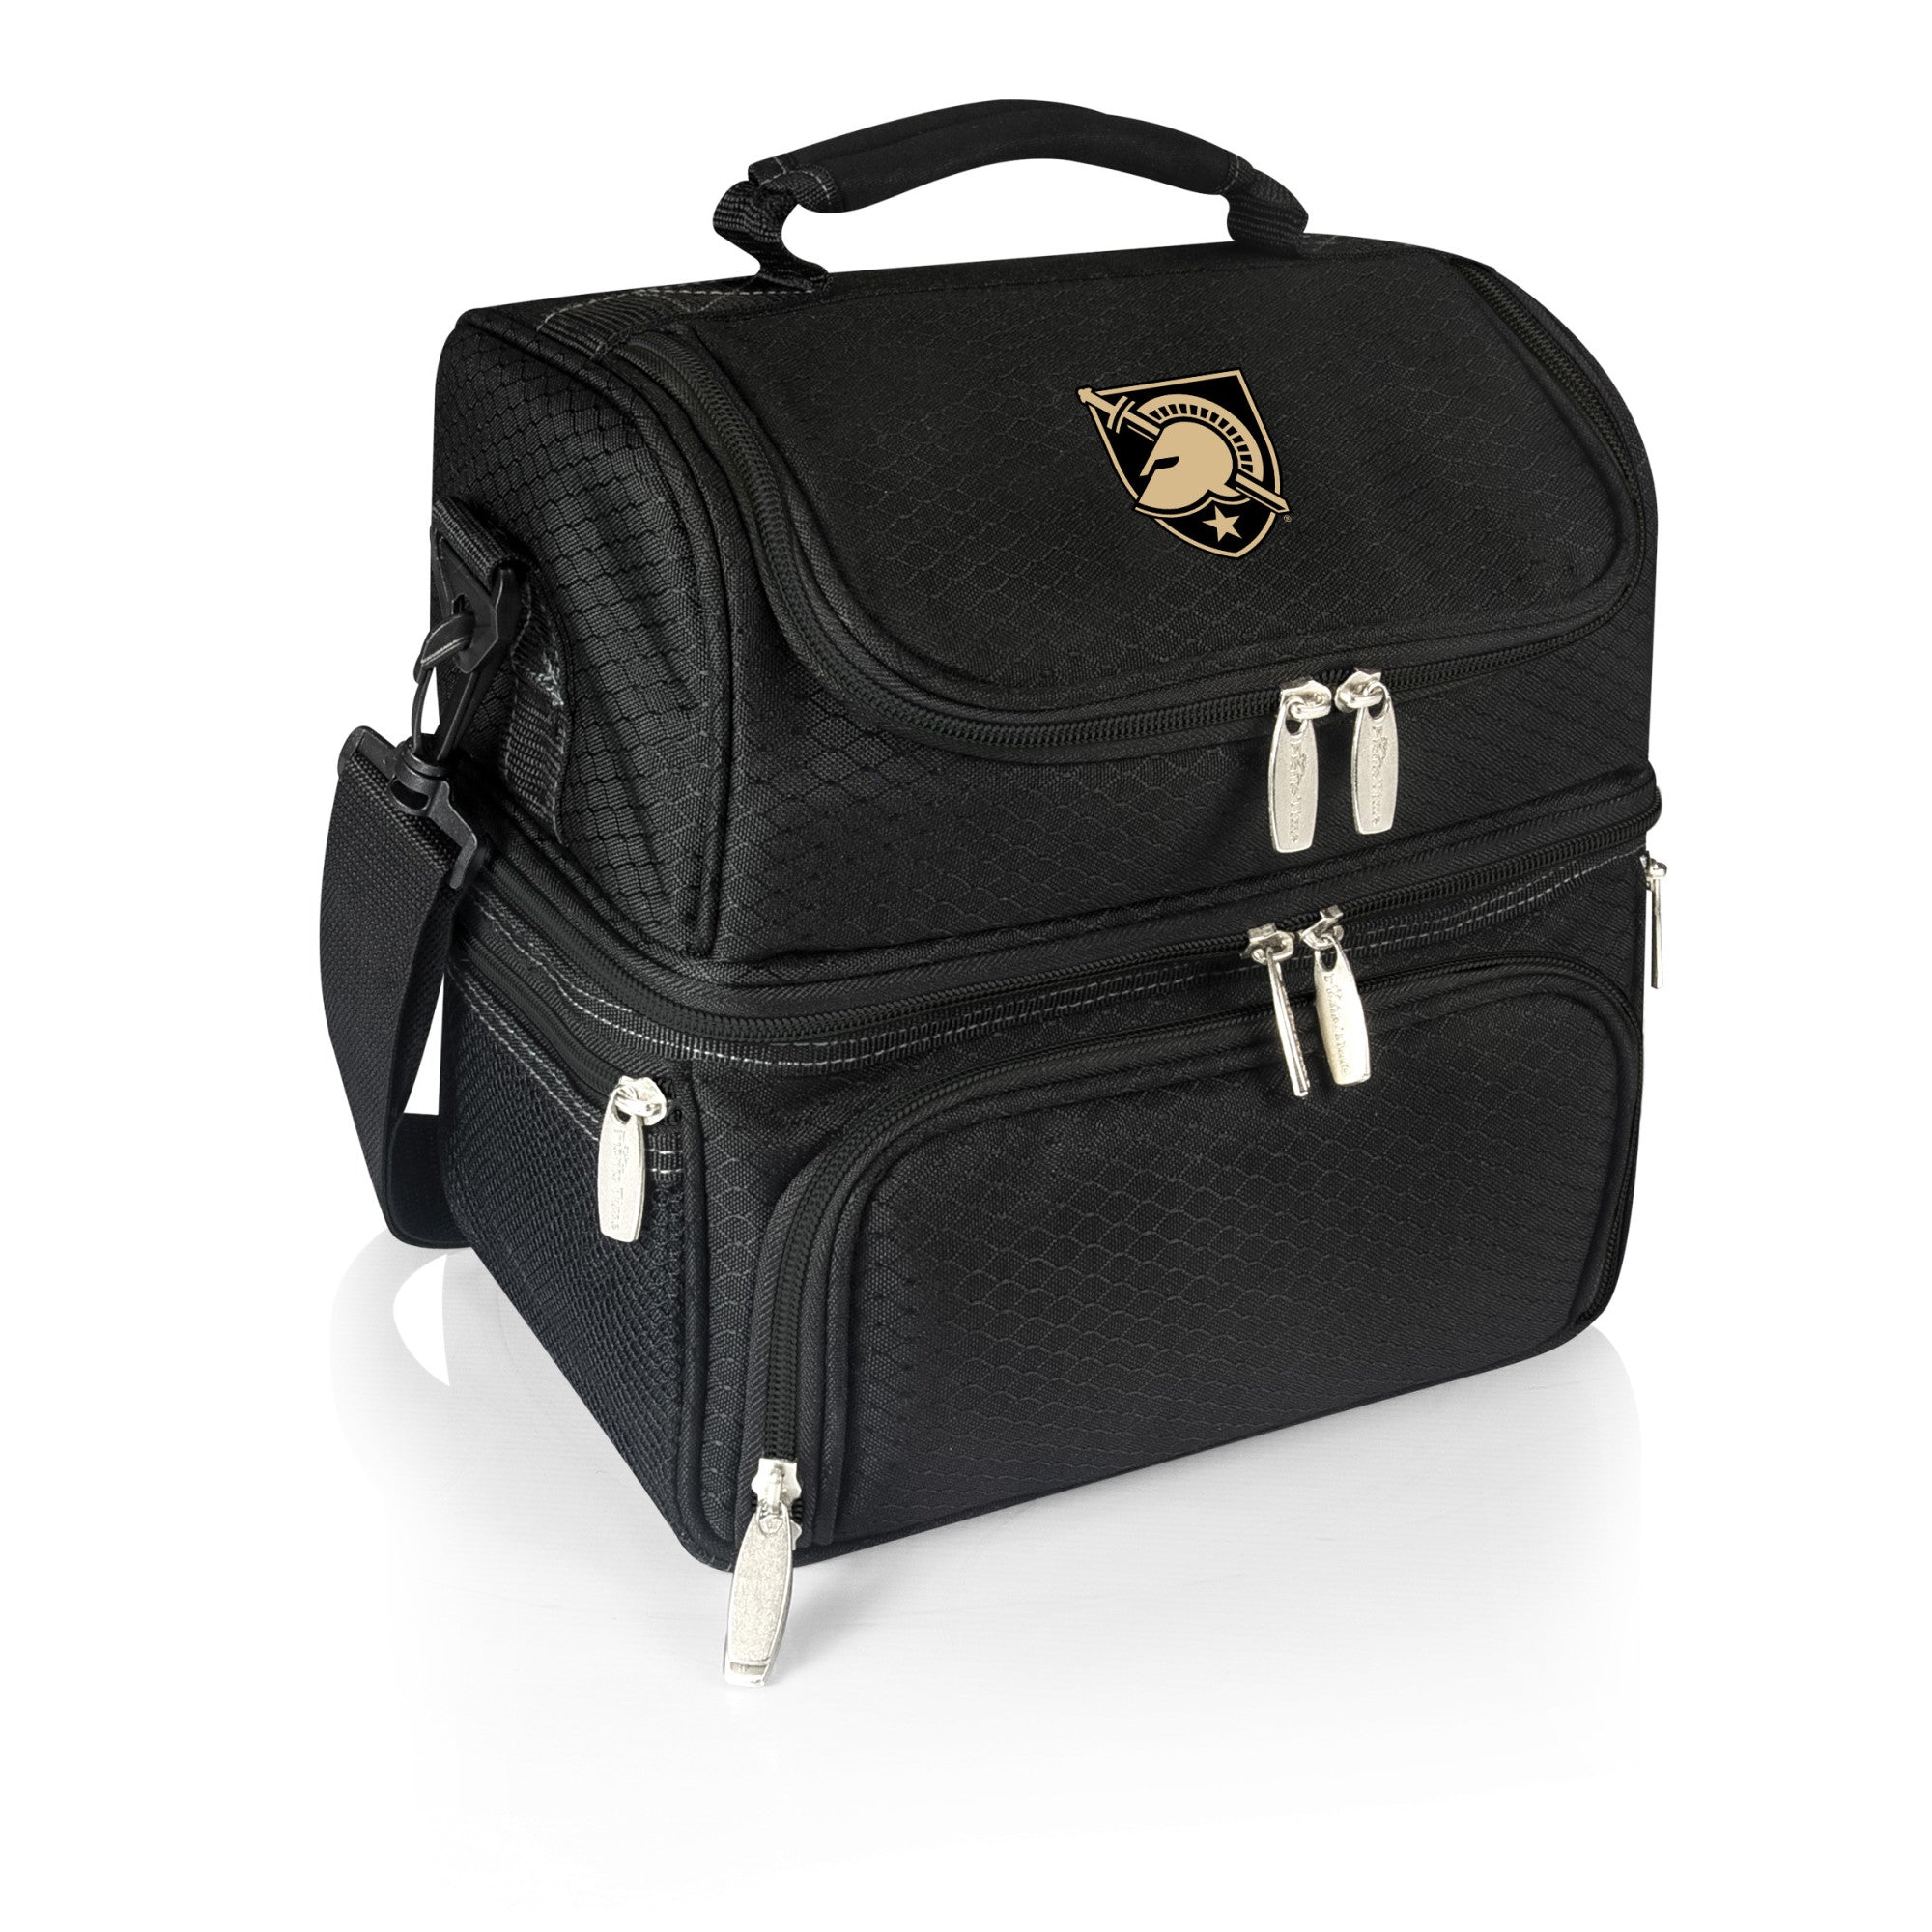 Army Black Knights - Pranzo Lunch Bag Cooler with Utensils